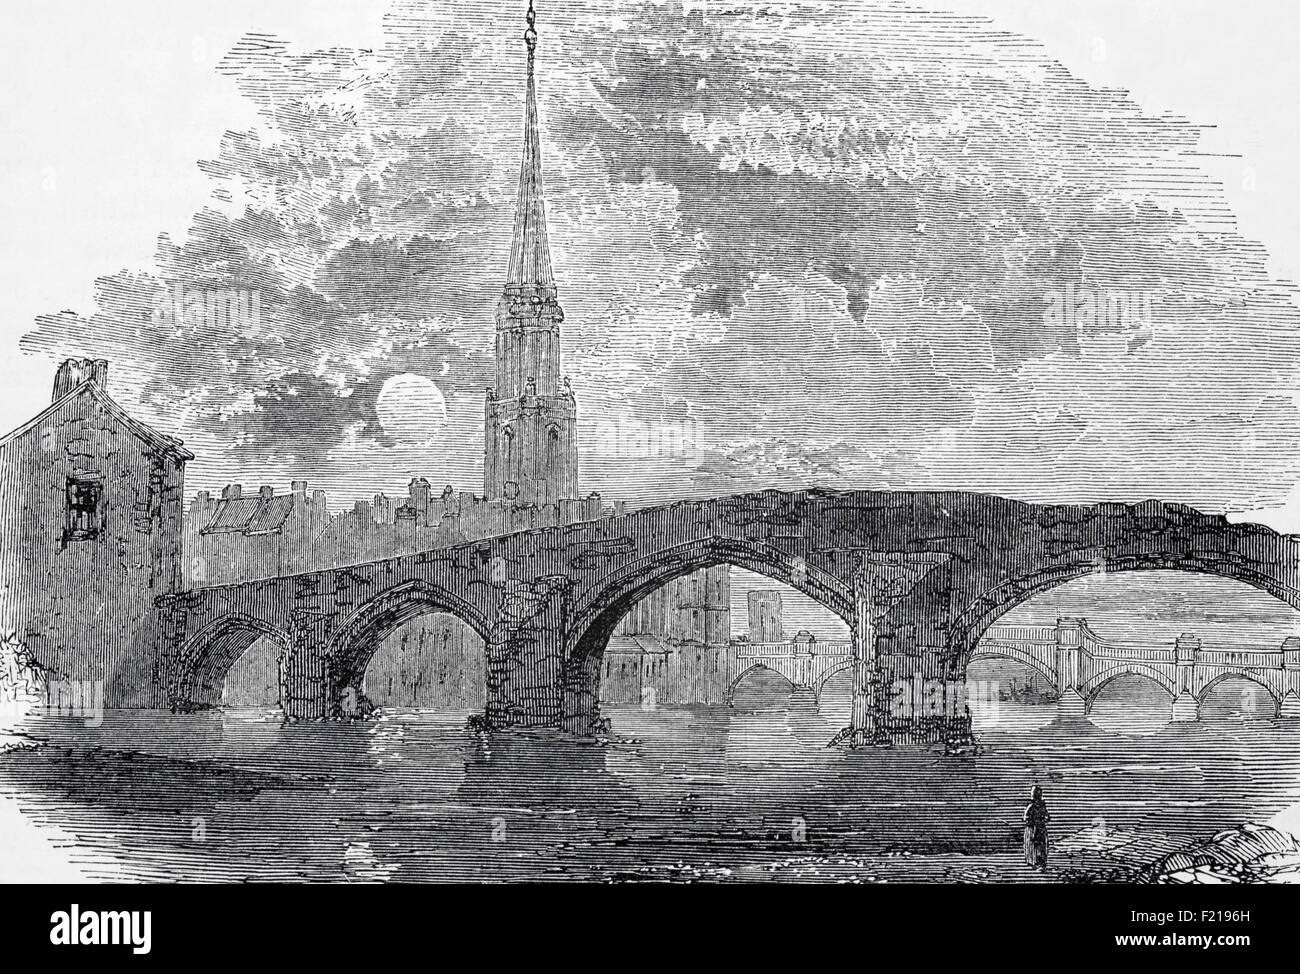 A 19th century view of the Auld Brig of Ayr built in 1470 across the River Ayr, Ayr, Scotland replaced the Timber Bridge from the 1200s. Robert Burns, wrote it would still be standing when the New Brig (built in his lifetime) was reduced to a 'shapeless cairn (stone heap)'. The so-called New Brig came down and was replaced in the 19th century, whilst the Auld Brig remains and is one of the oldest stone bridges in Scotland. Stock Photo